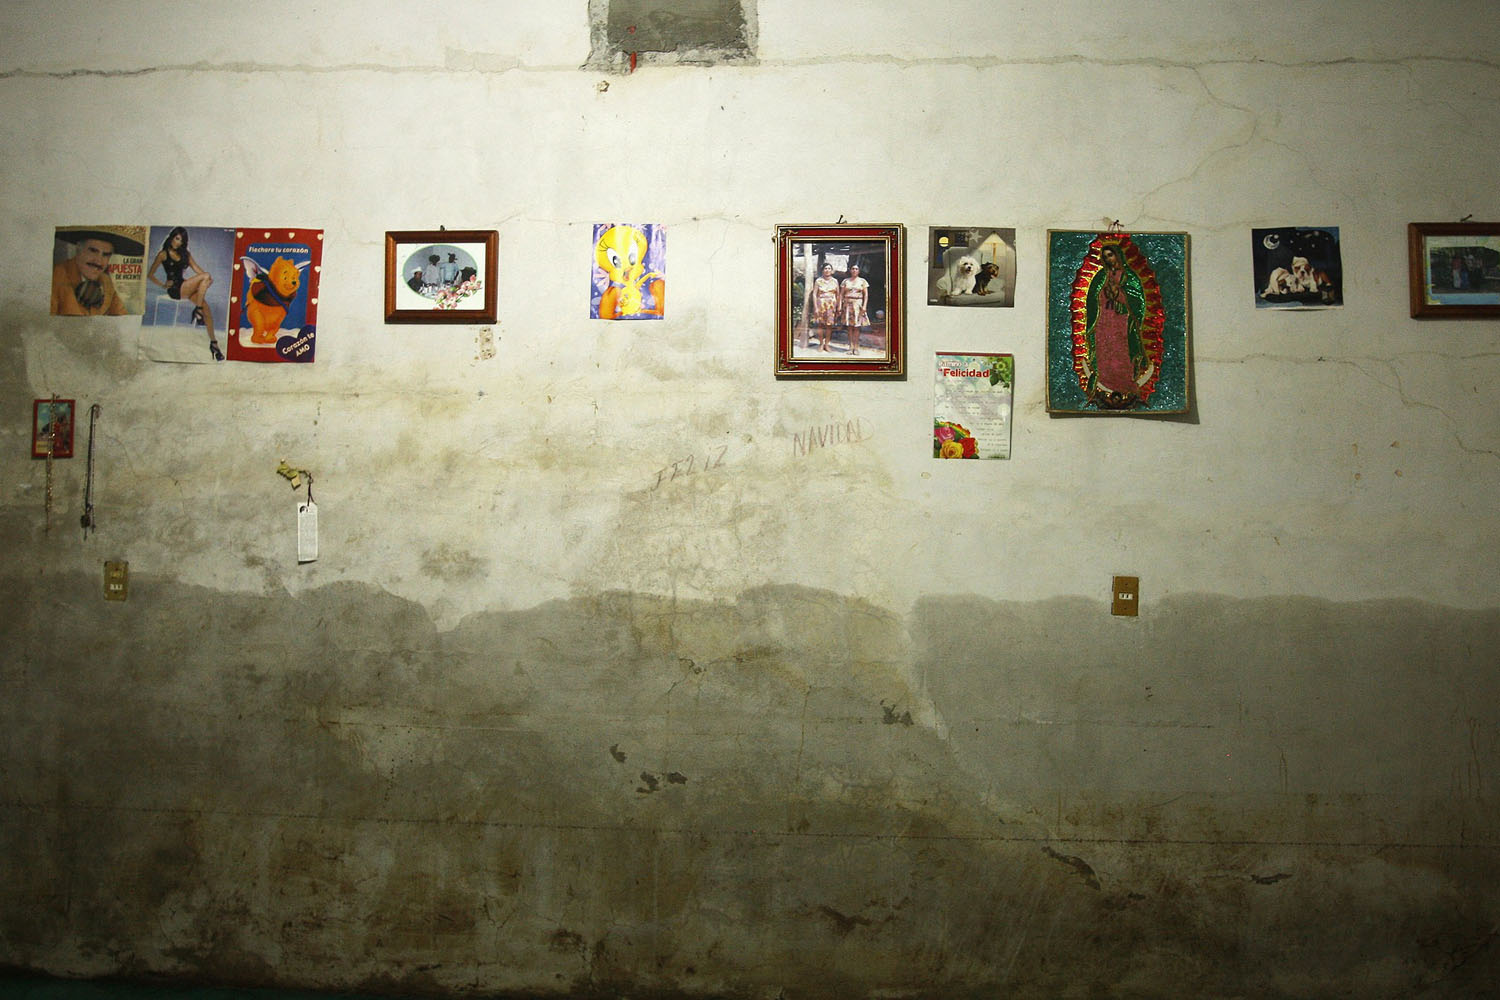 Pictures hang on a wall stained with water marks inside a house in San Cristobal Sola de Vega